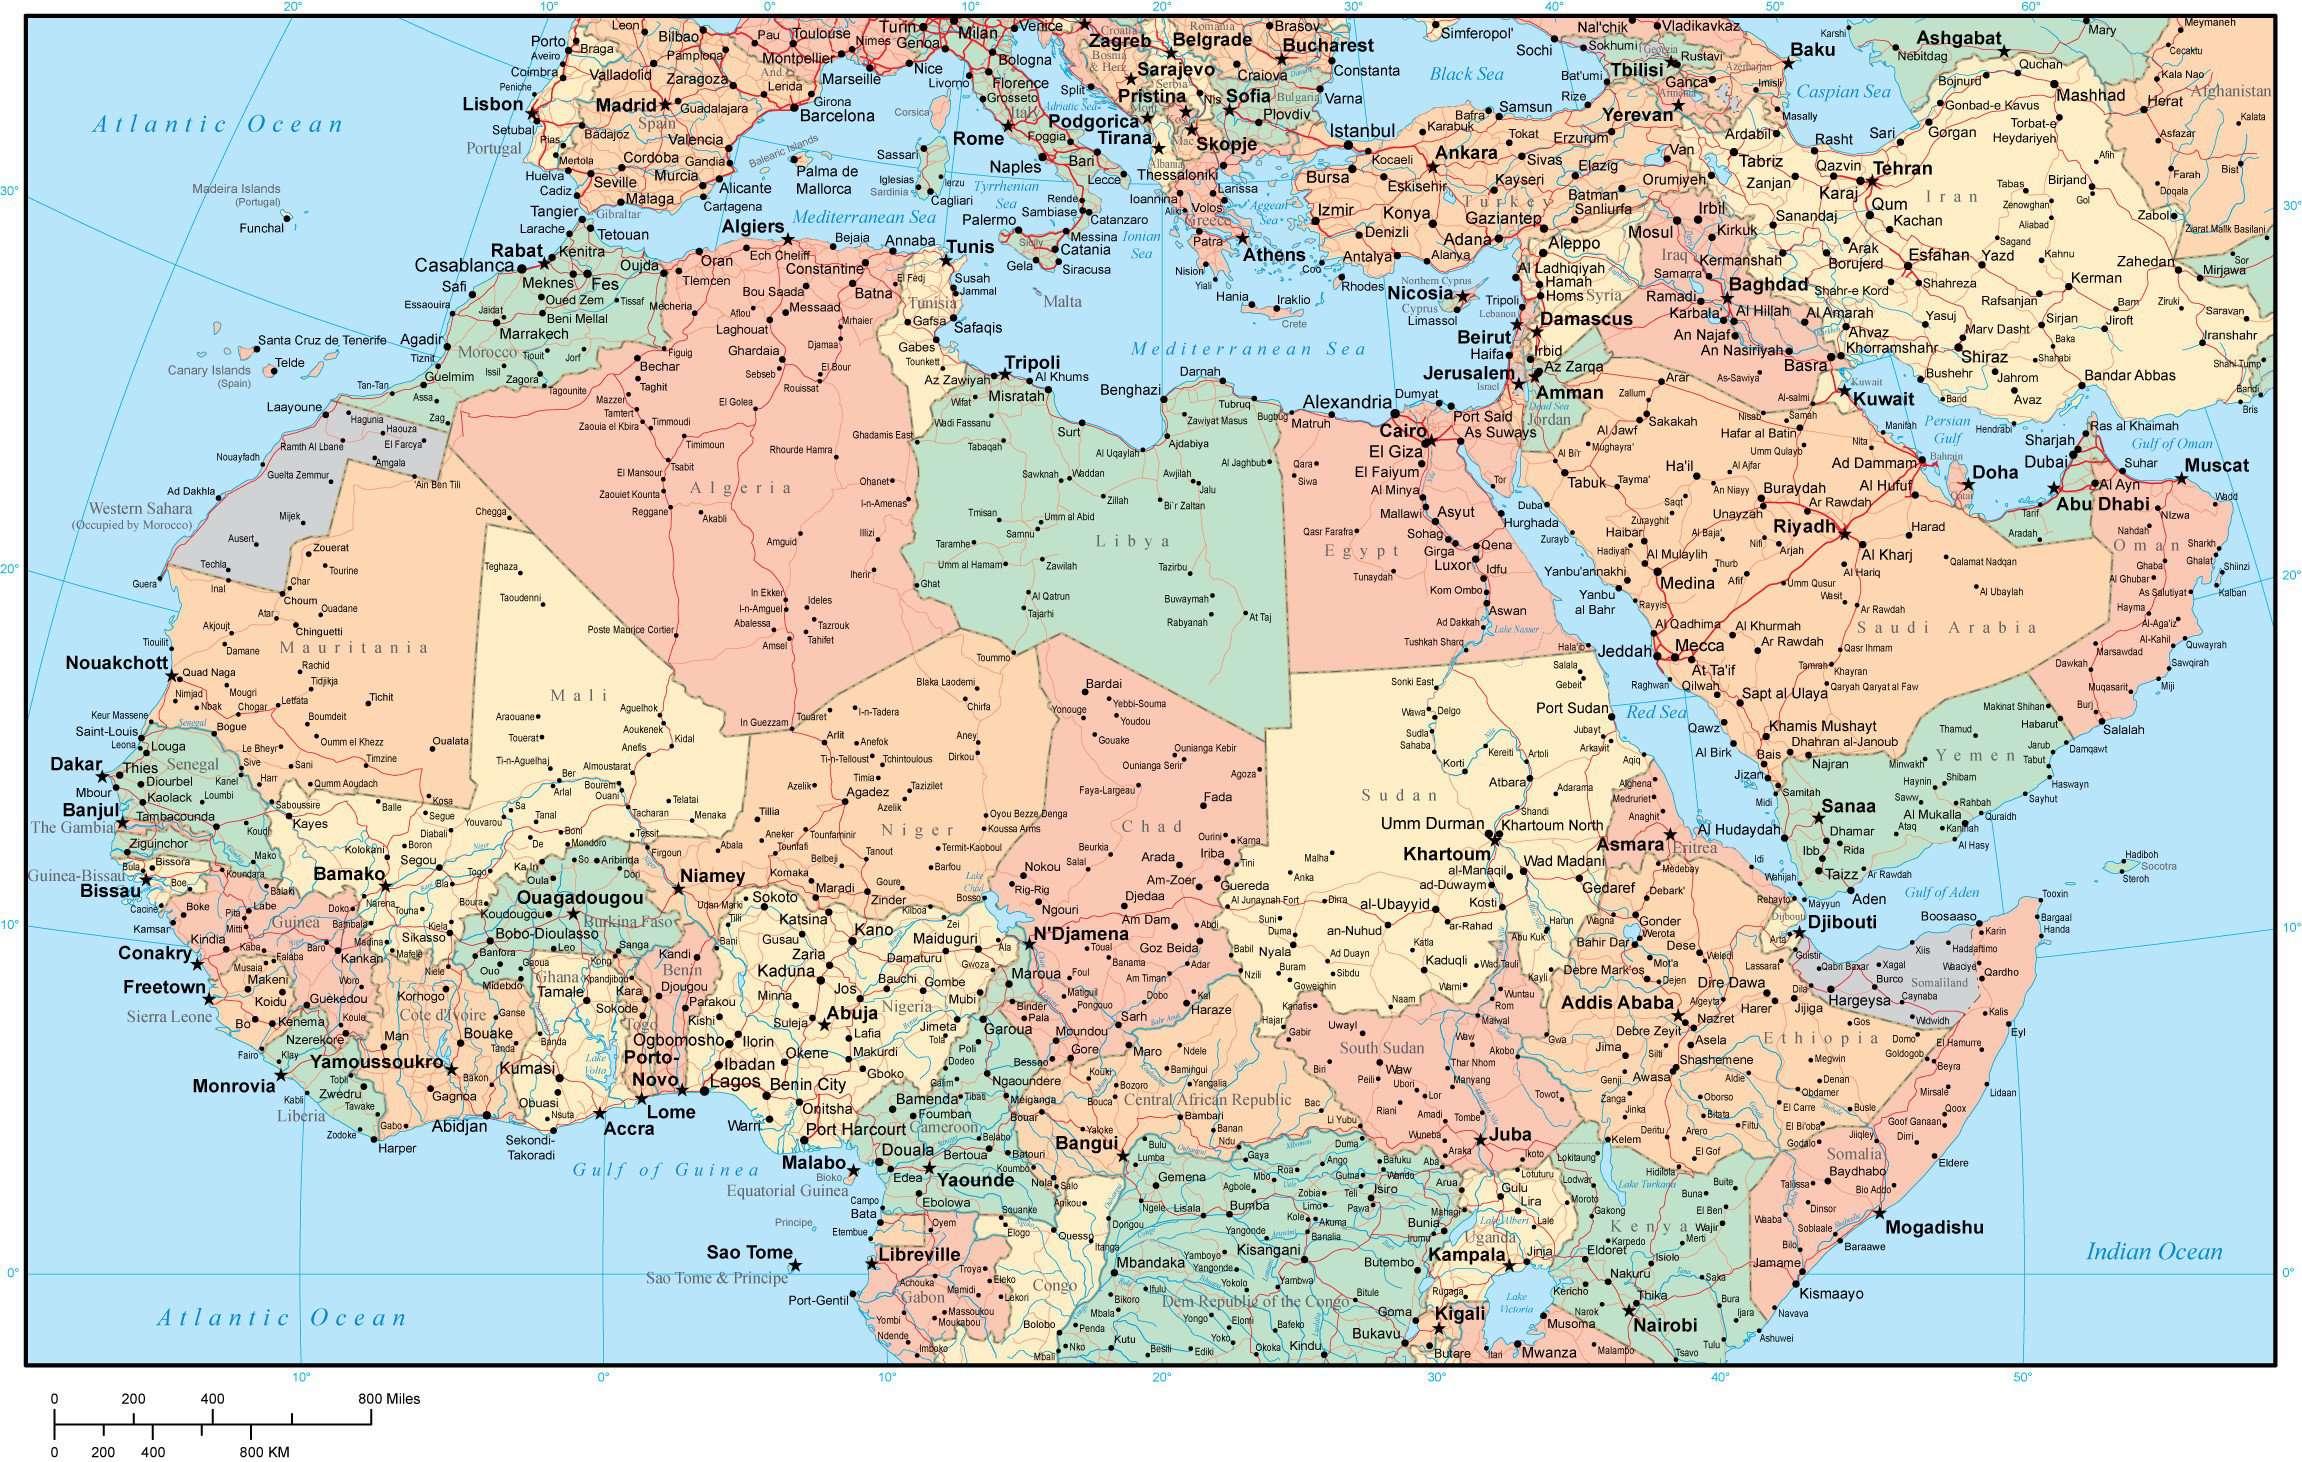 Northern Africa Map